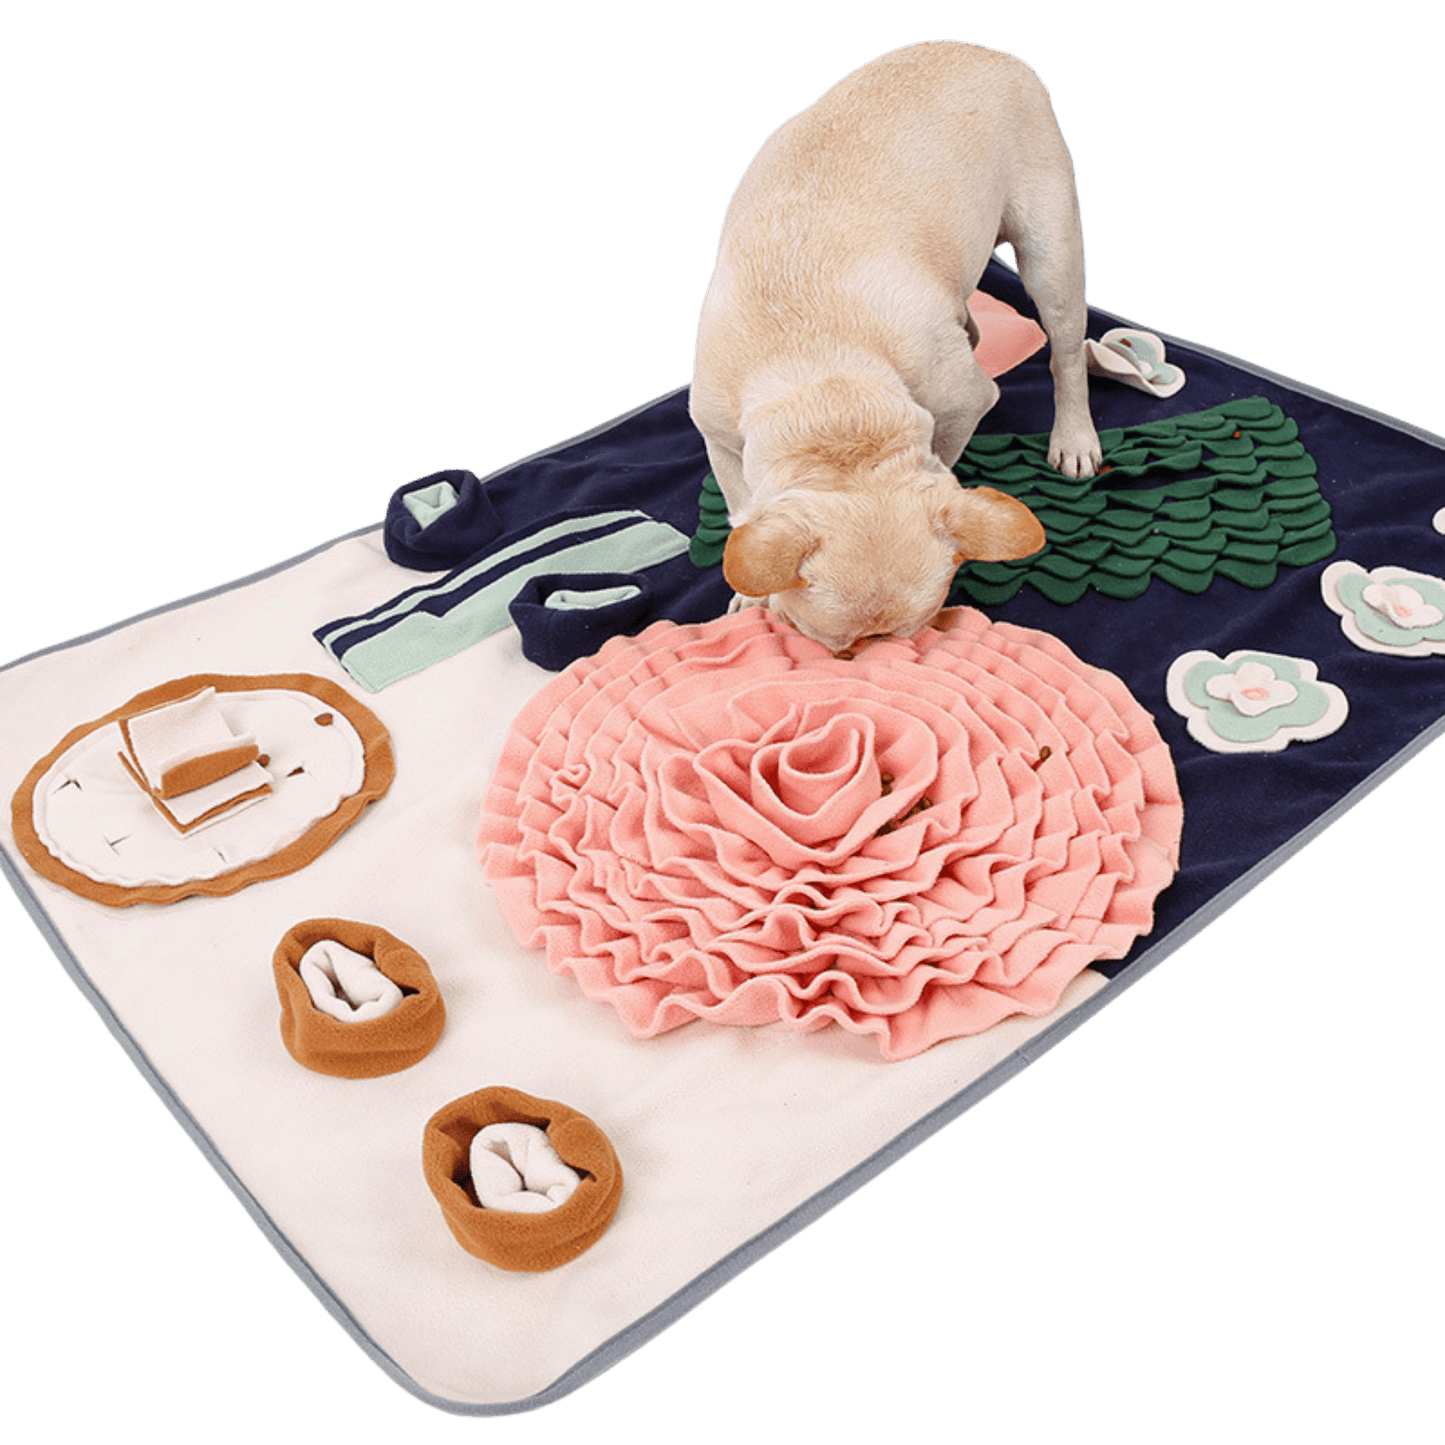 Vegetable Garden Snuffle Mat – Fit for a Pit